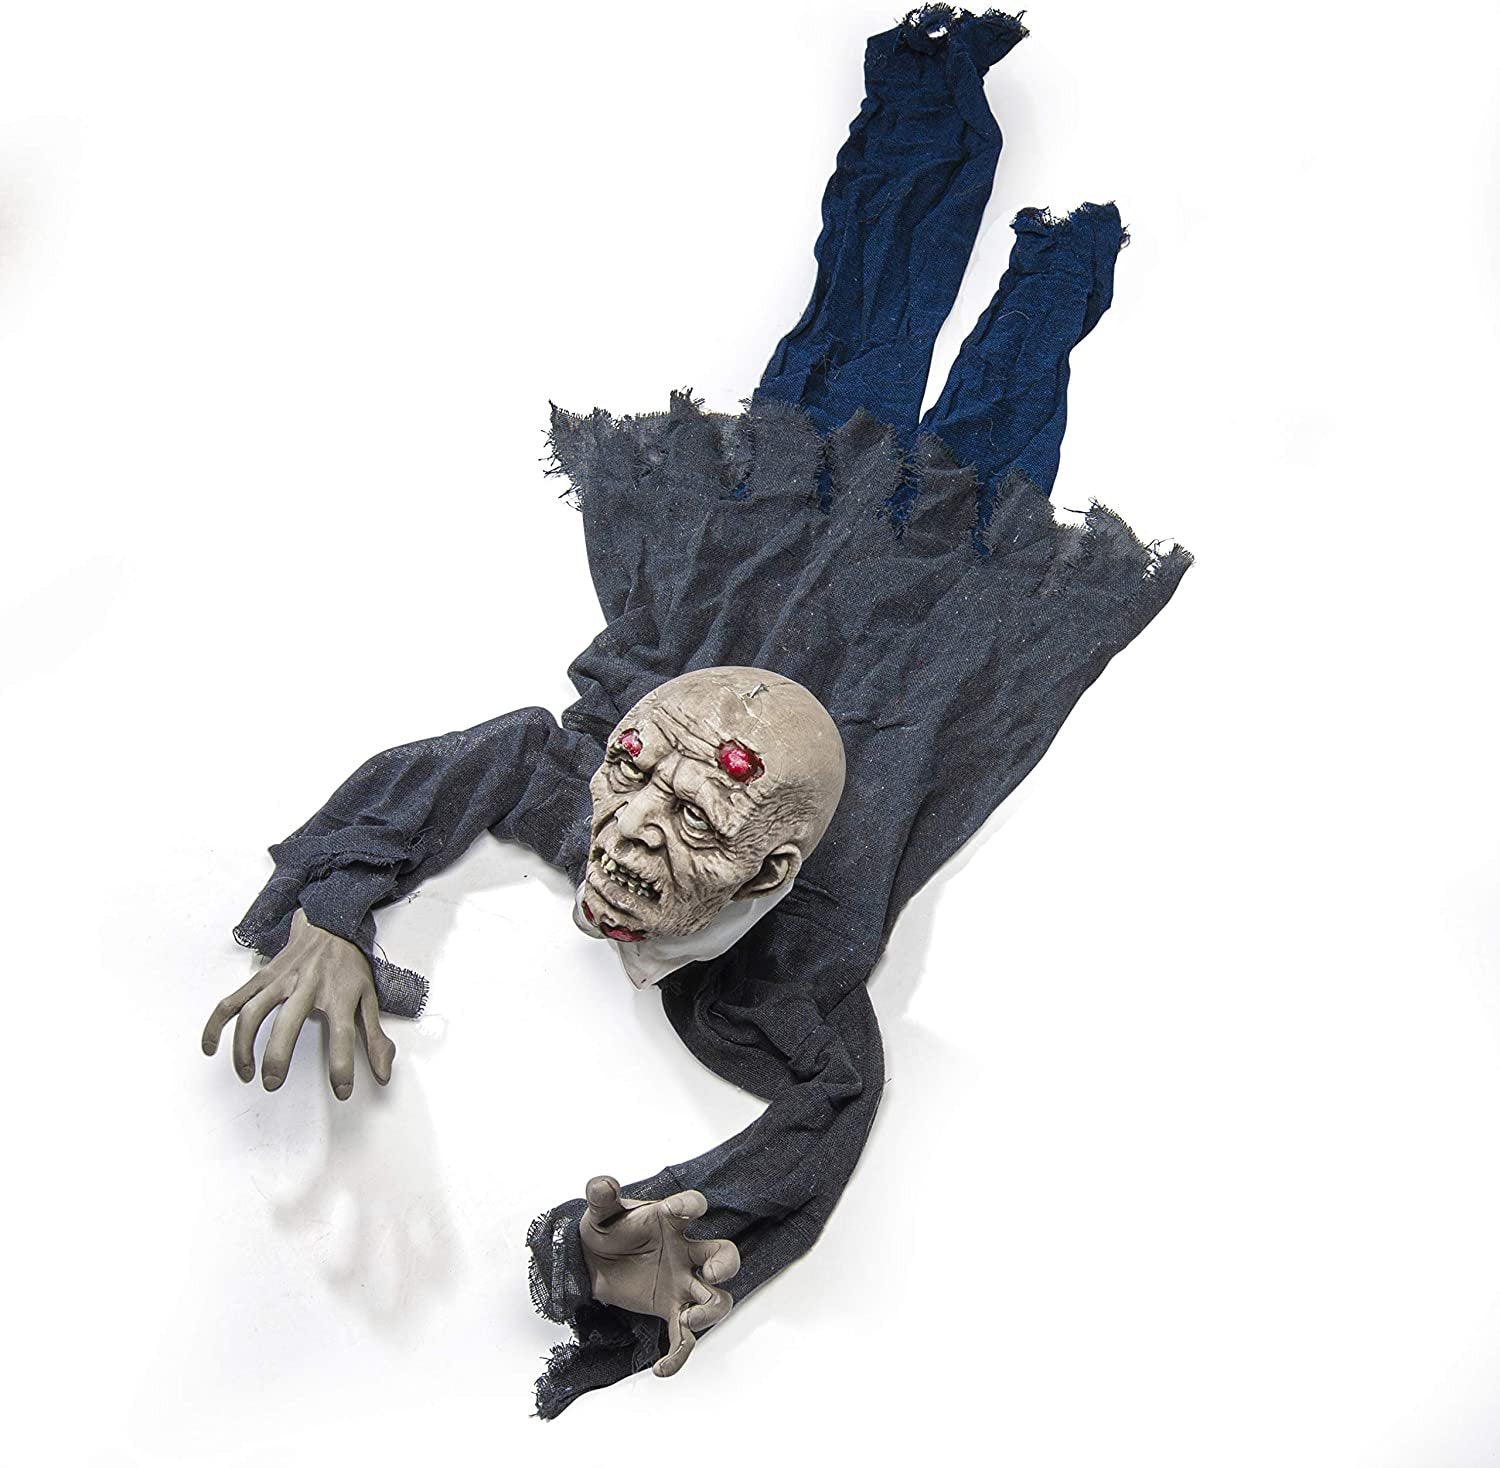 Halloween Zombie Decoration with Flowing Robe, Black, Outdoor Prop for Best Decor - Free Shipping